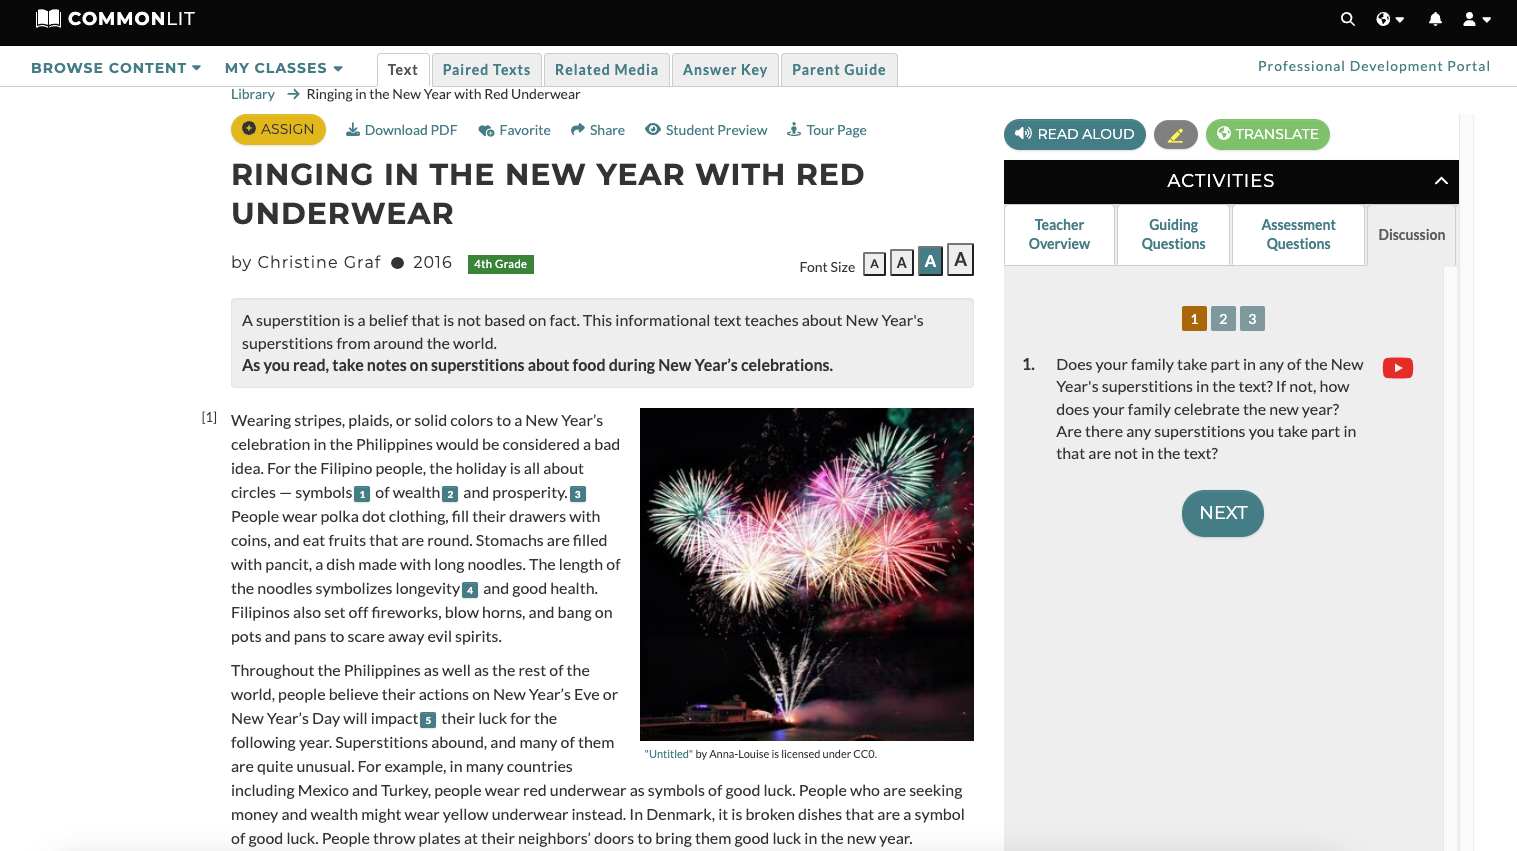 A screenshot of the lesson for "Ringing in the New Year with Red Underwear."